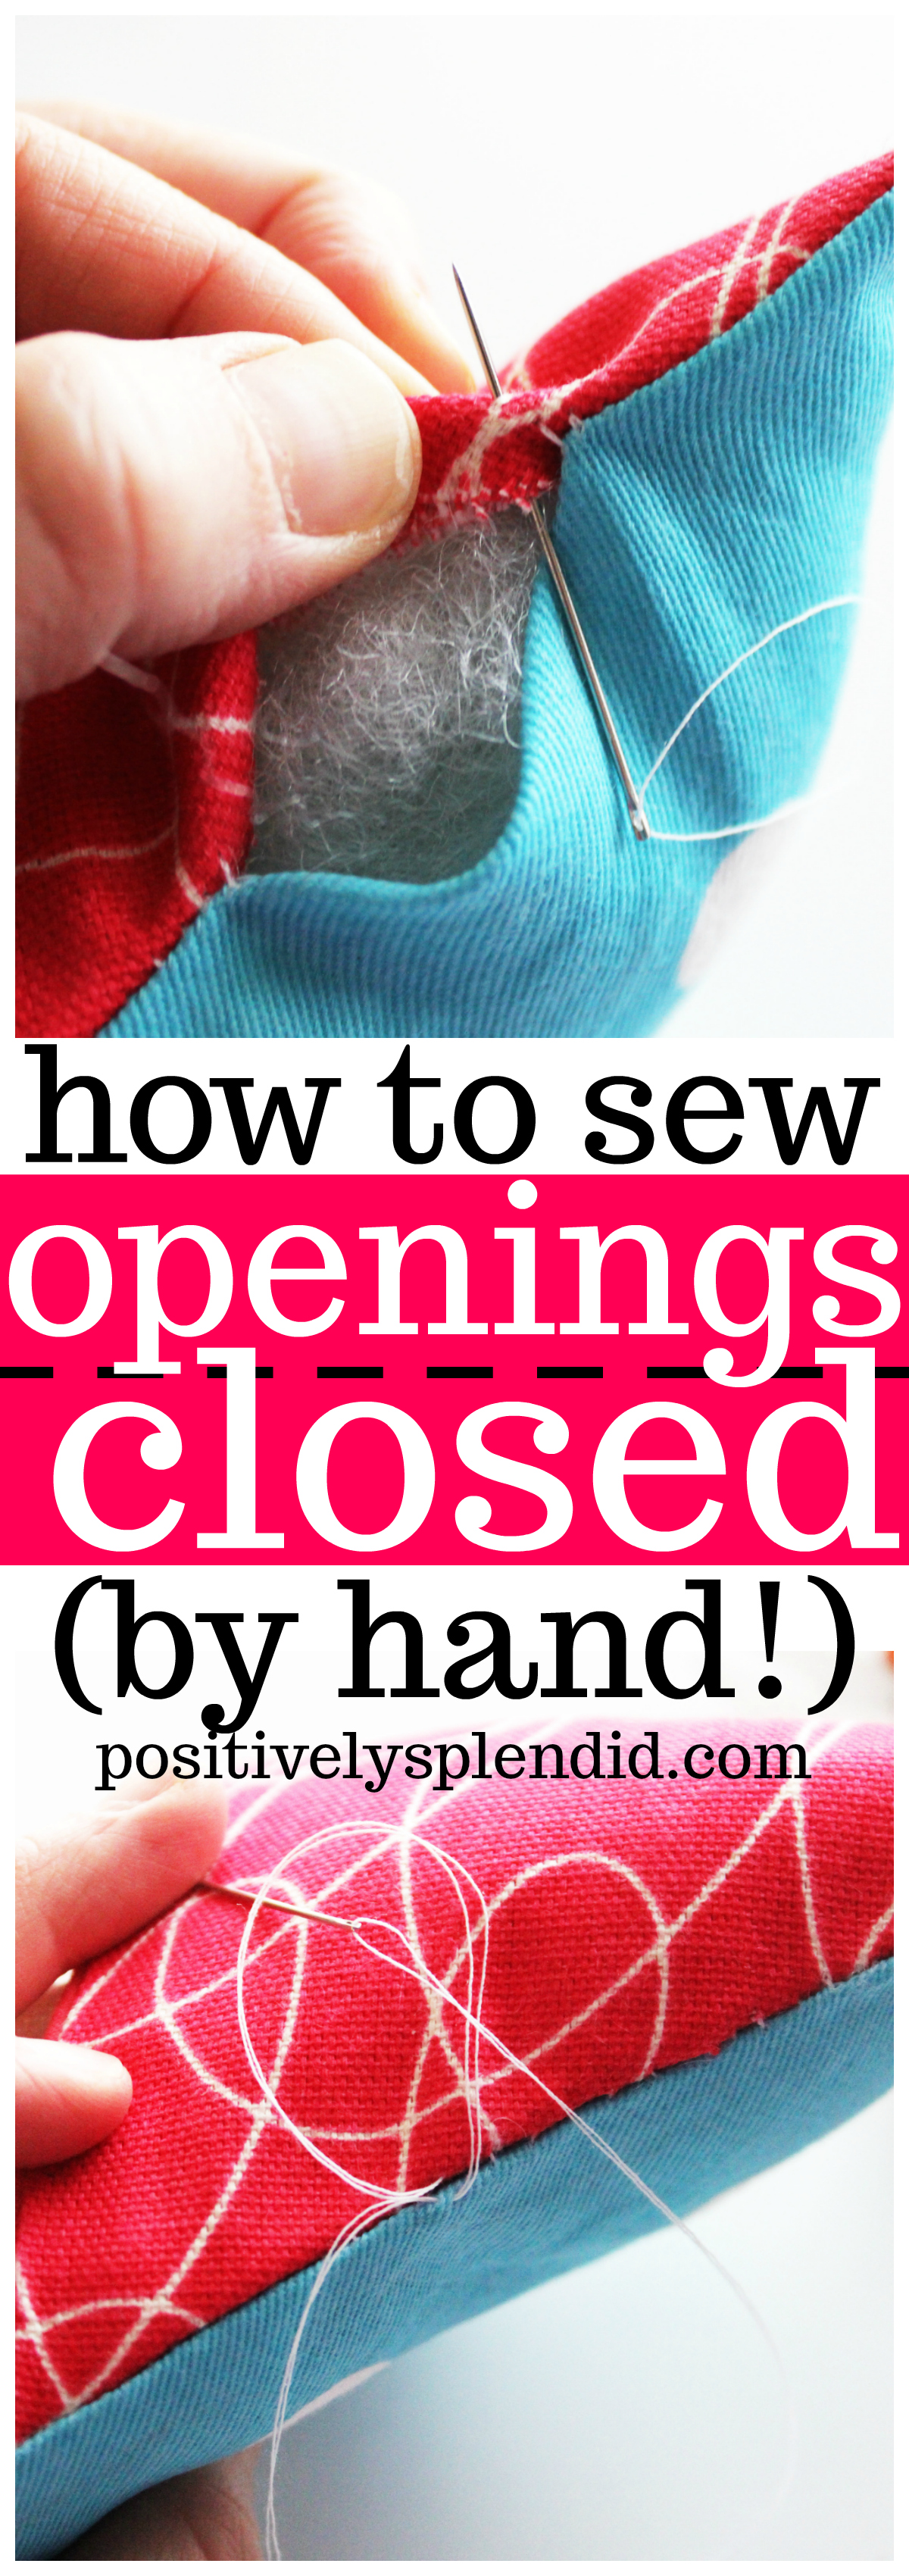 Ladder Stitch Tutorial (How to sew openings on pillows and other project closed by hand!)